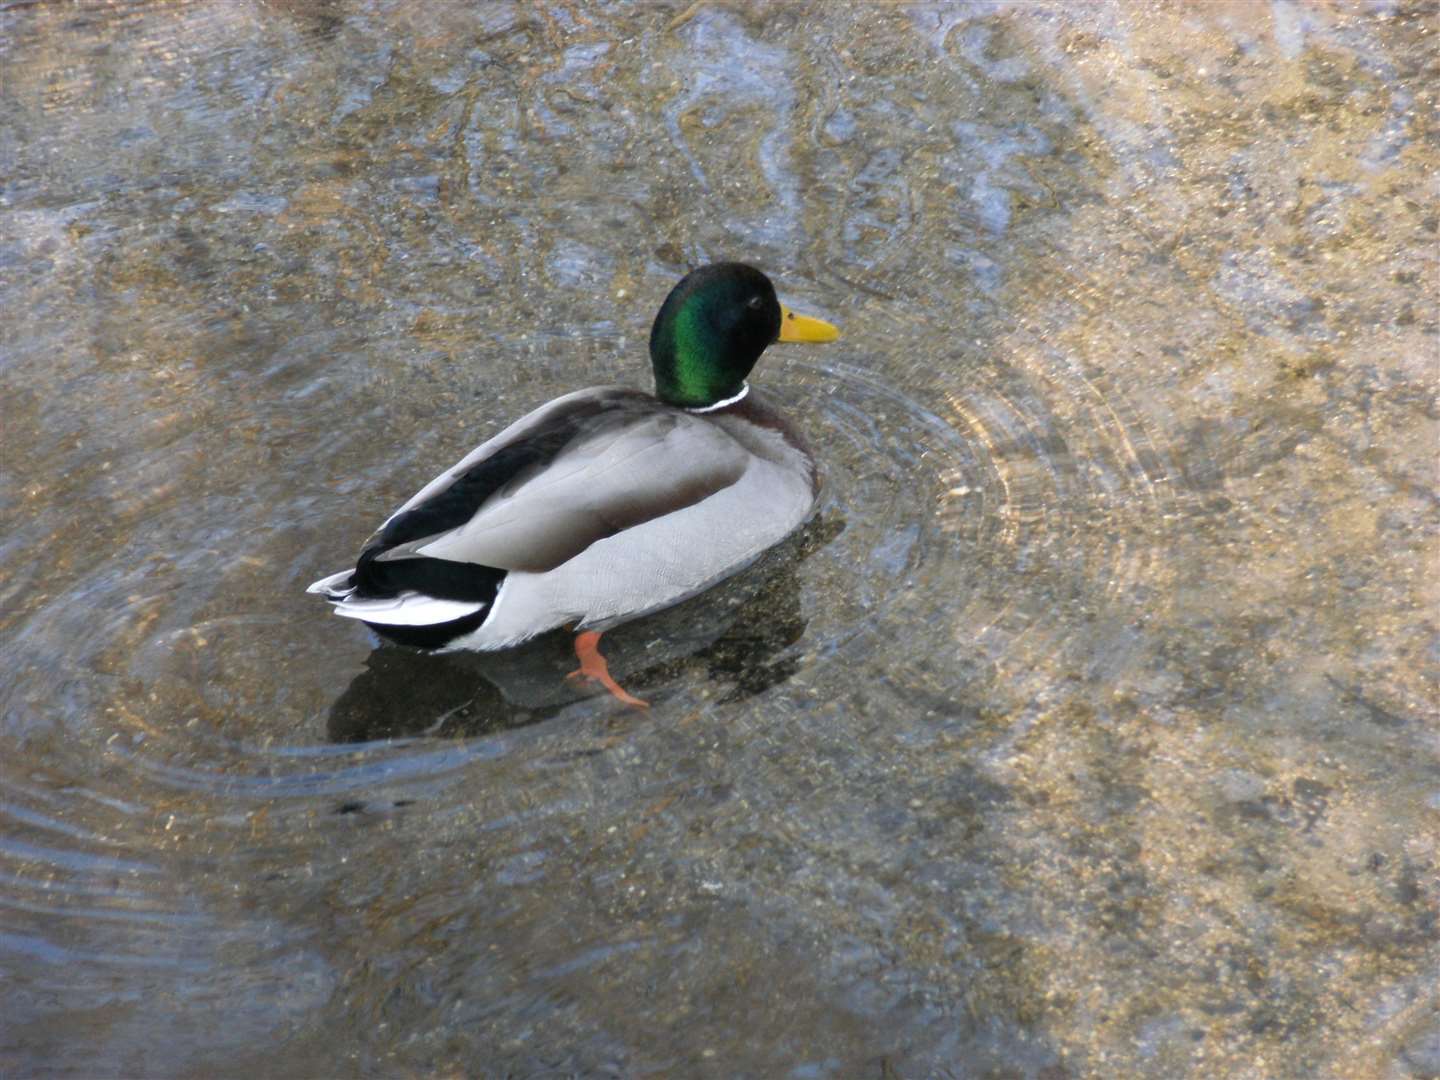 The council wants to encourage more ducks to the pond